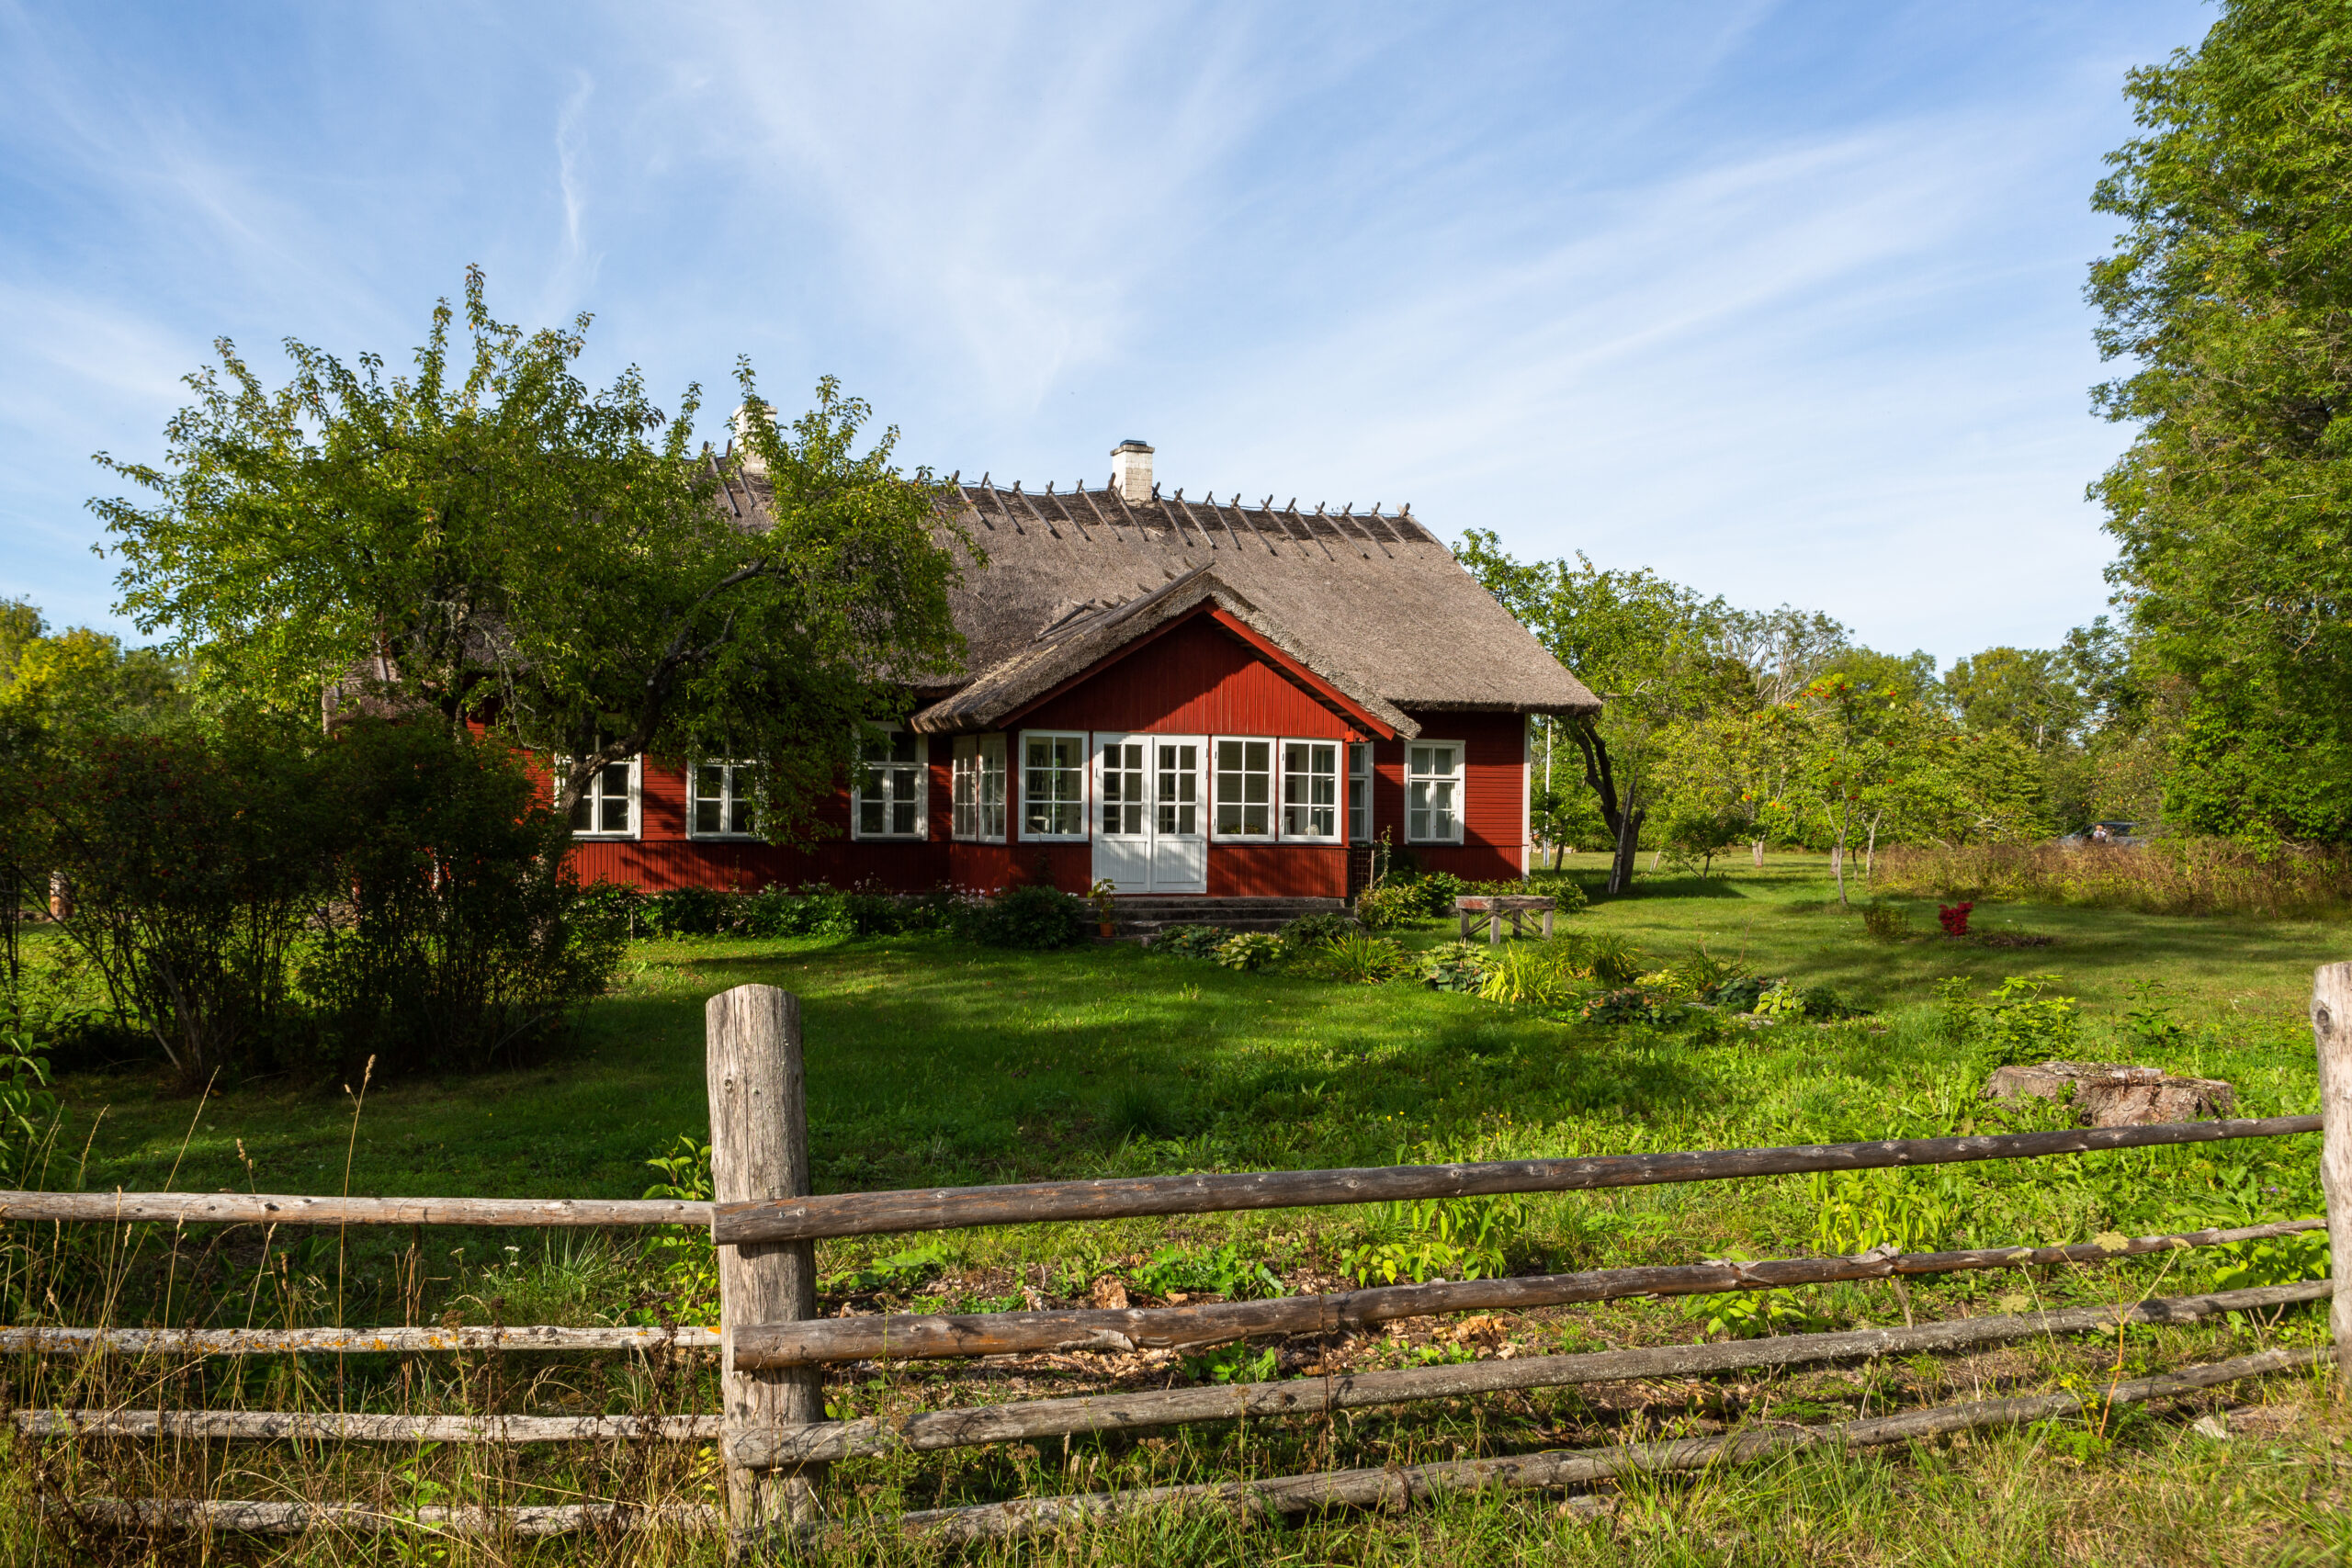 Traditional house in Estonia behind a wooden fence.